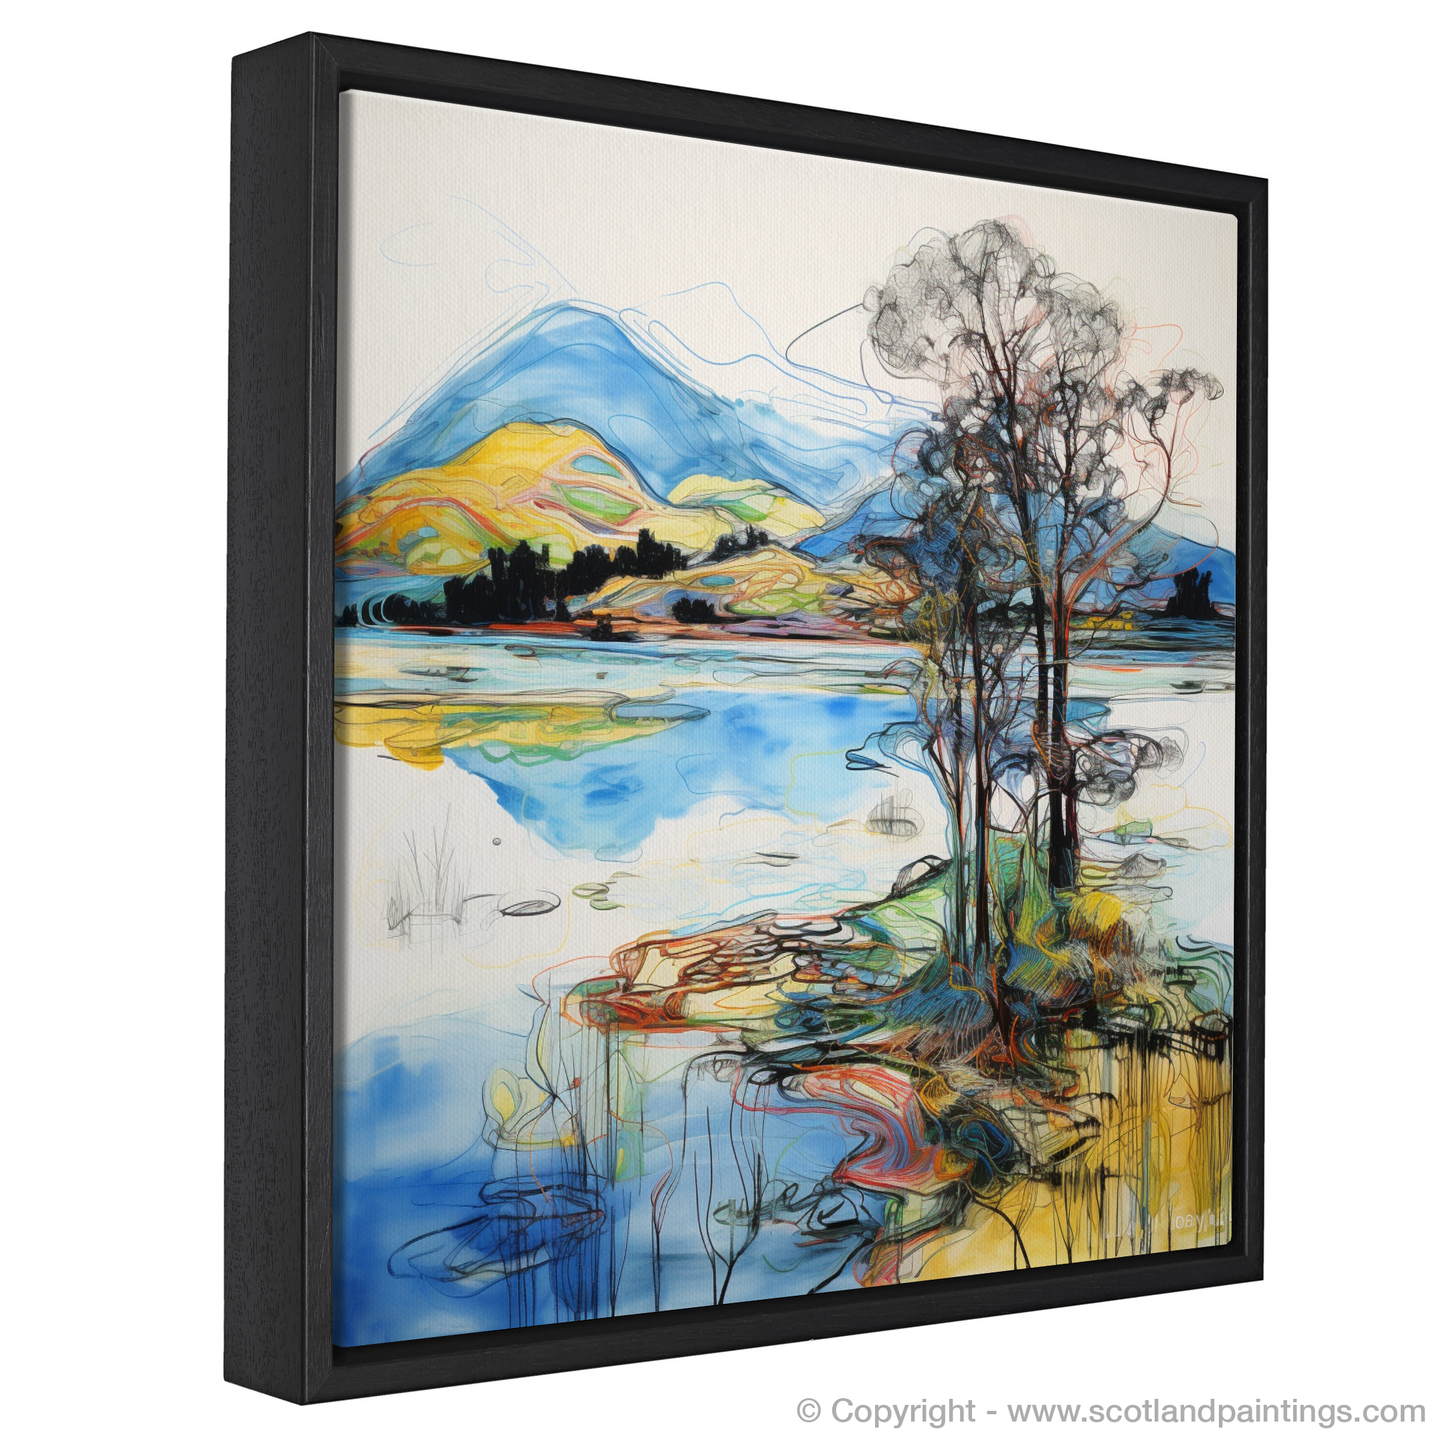 Painting and Art Print of Loch Awe entitled "Contemporary Visions of Loch Awe".